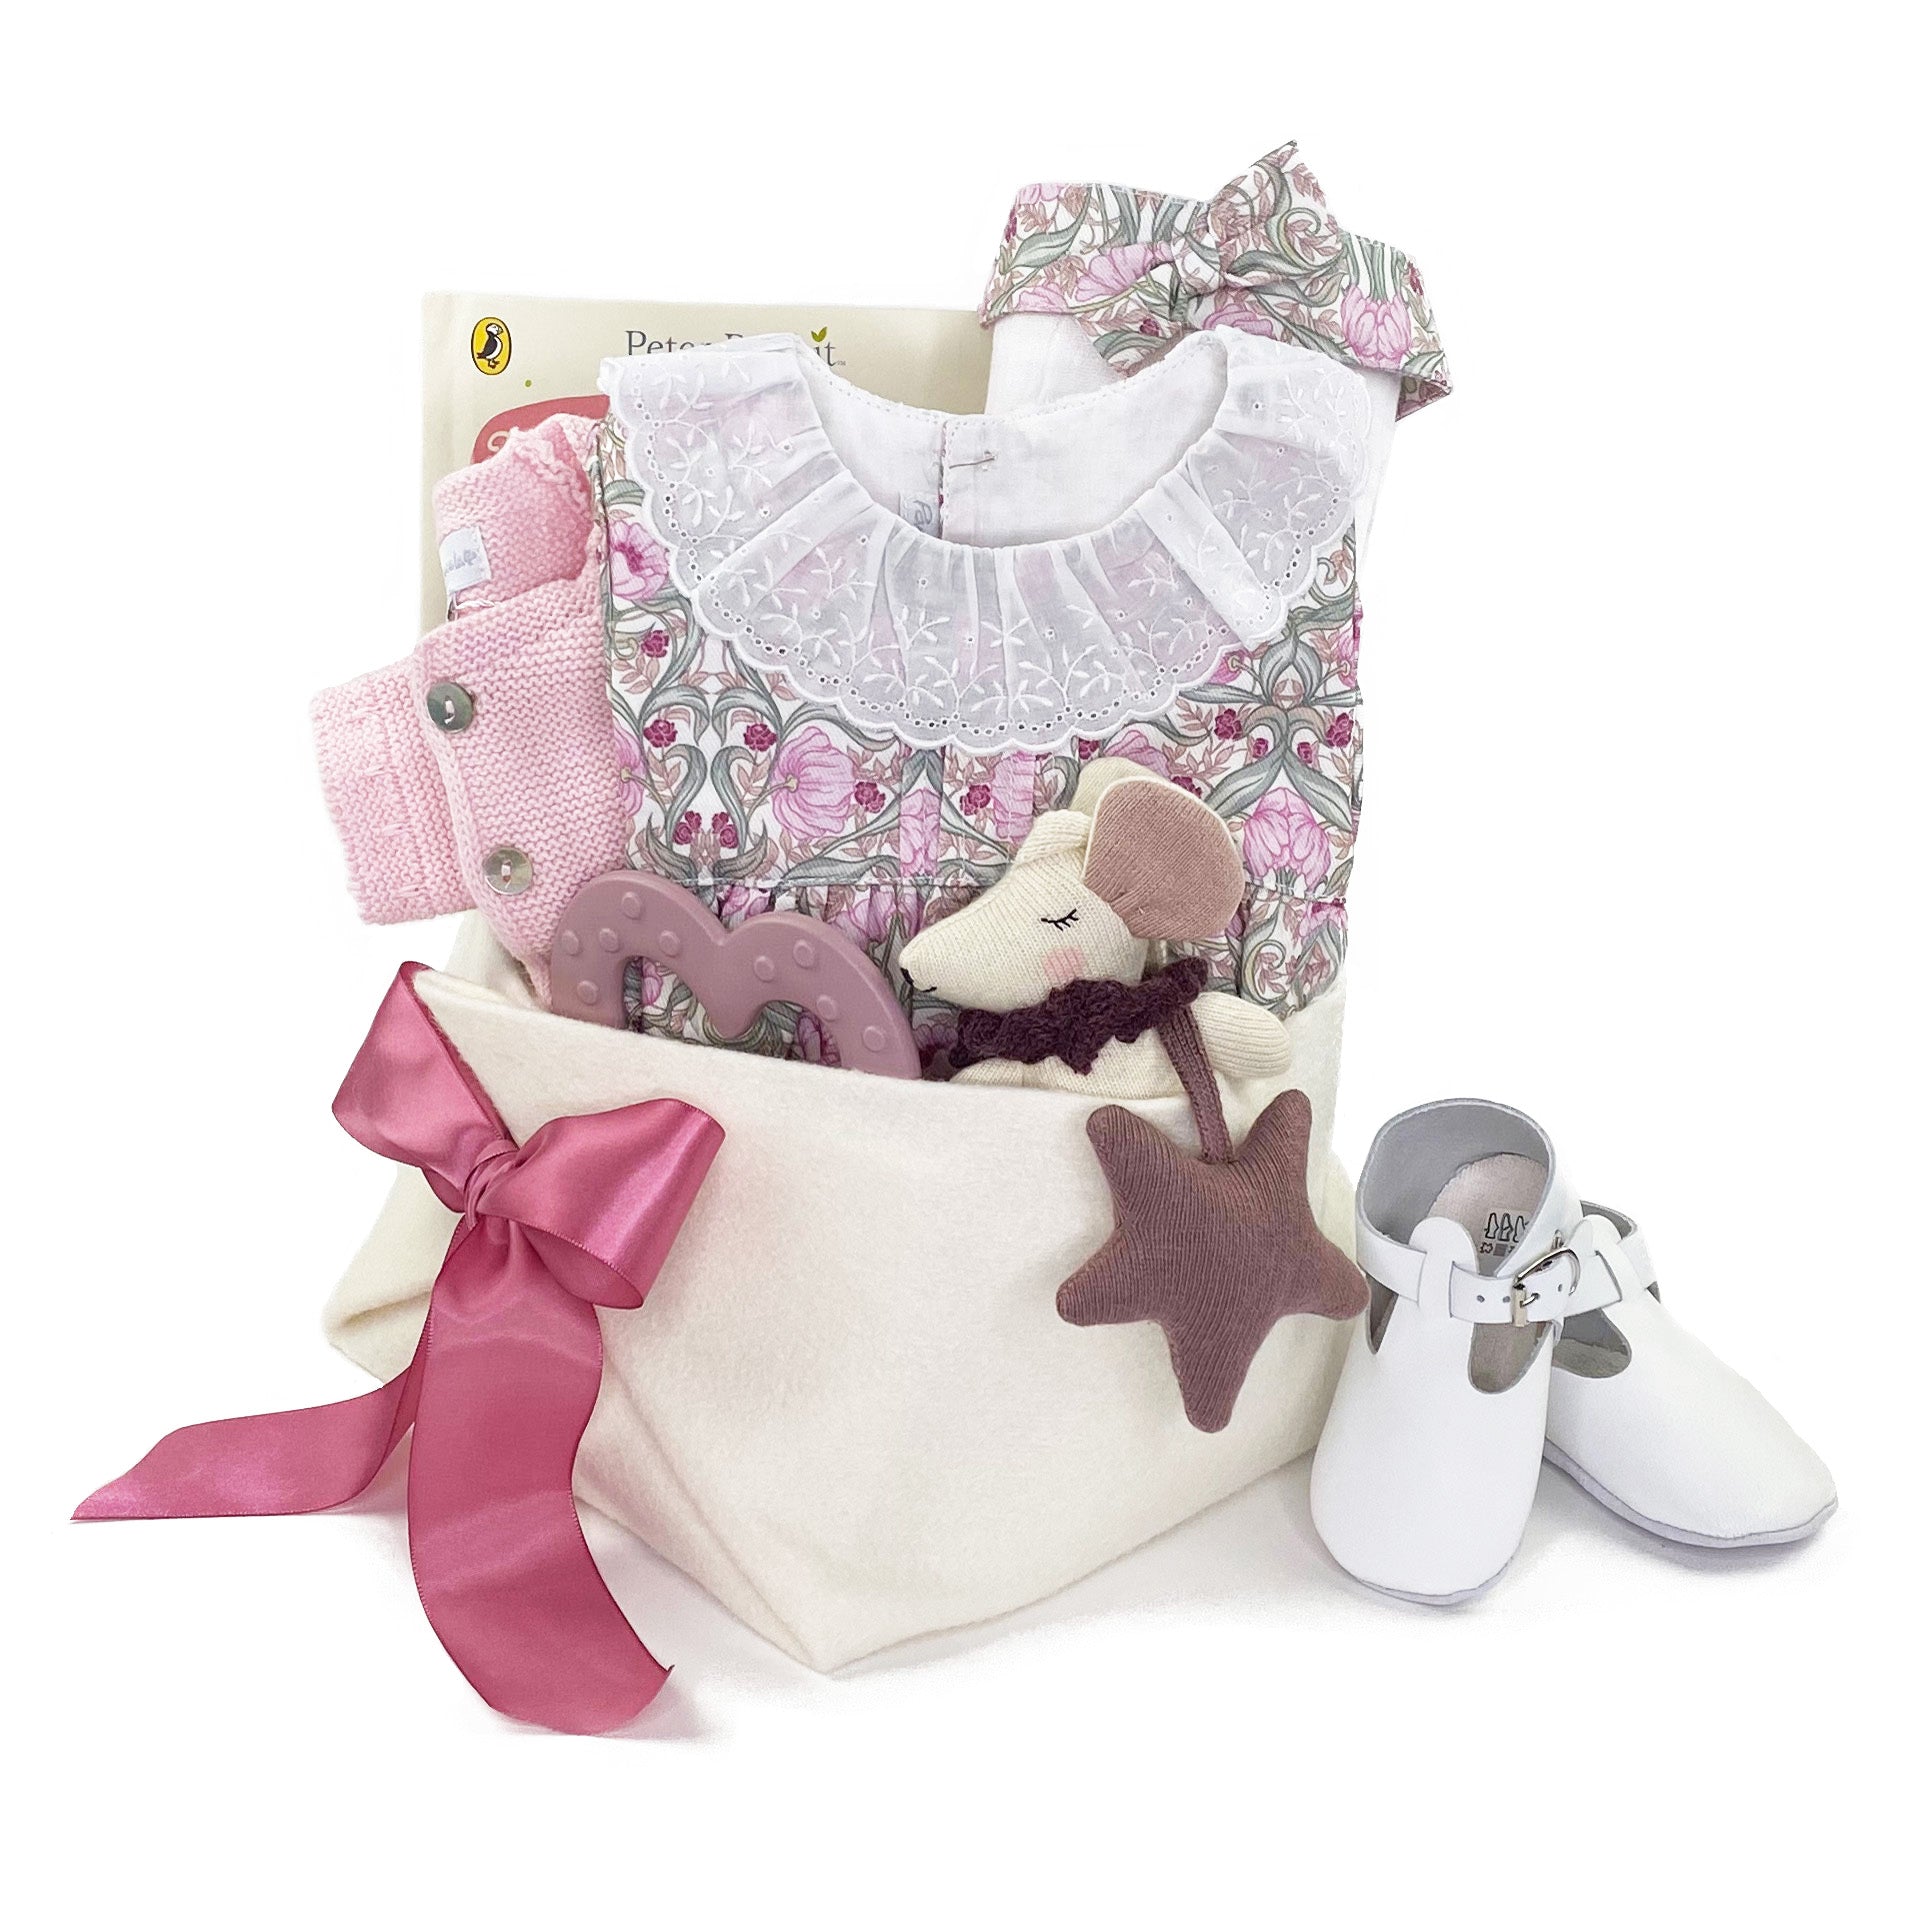 Luxury Baby Girl Gift at Bonjour Baby Baskets 